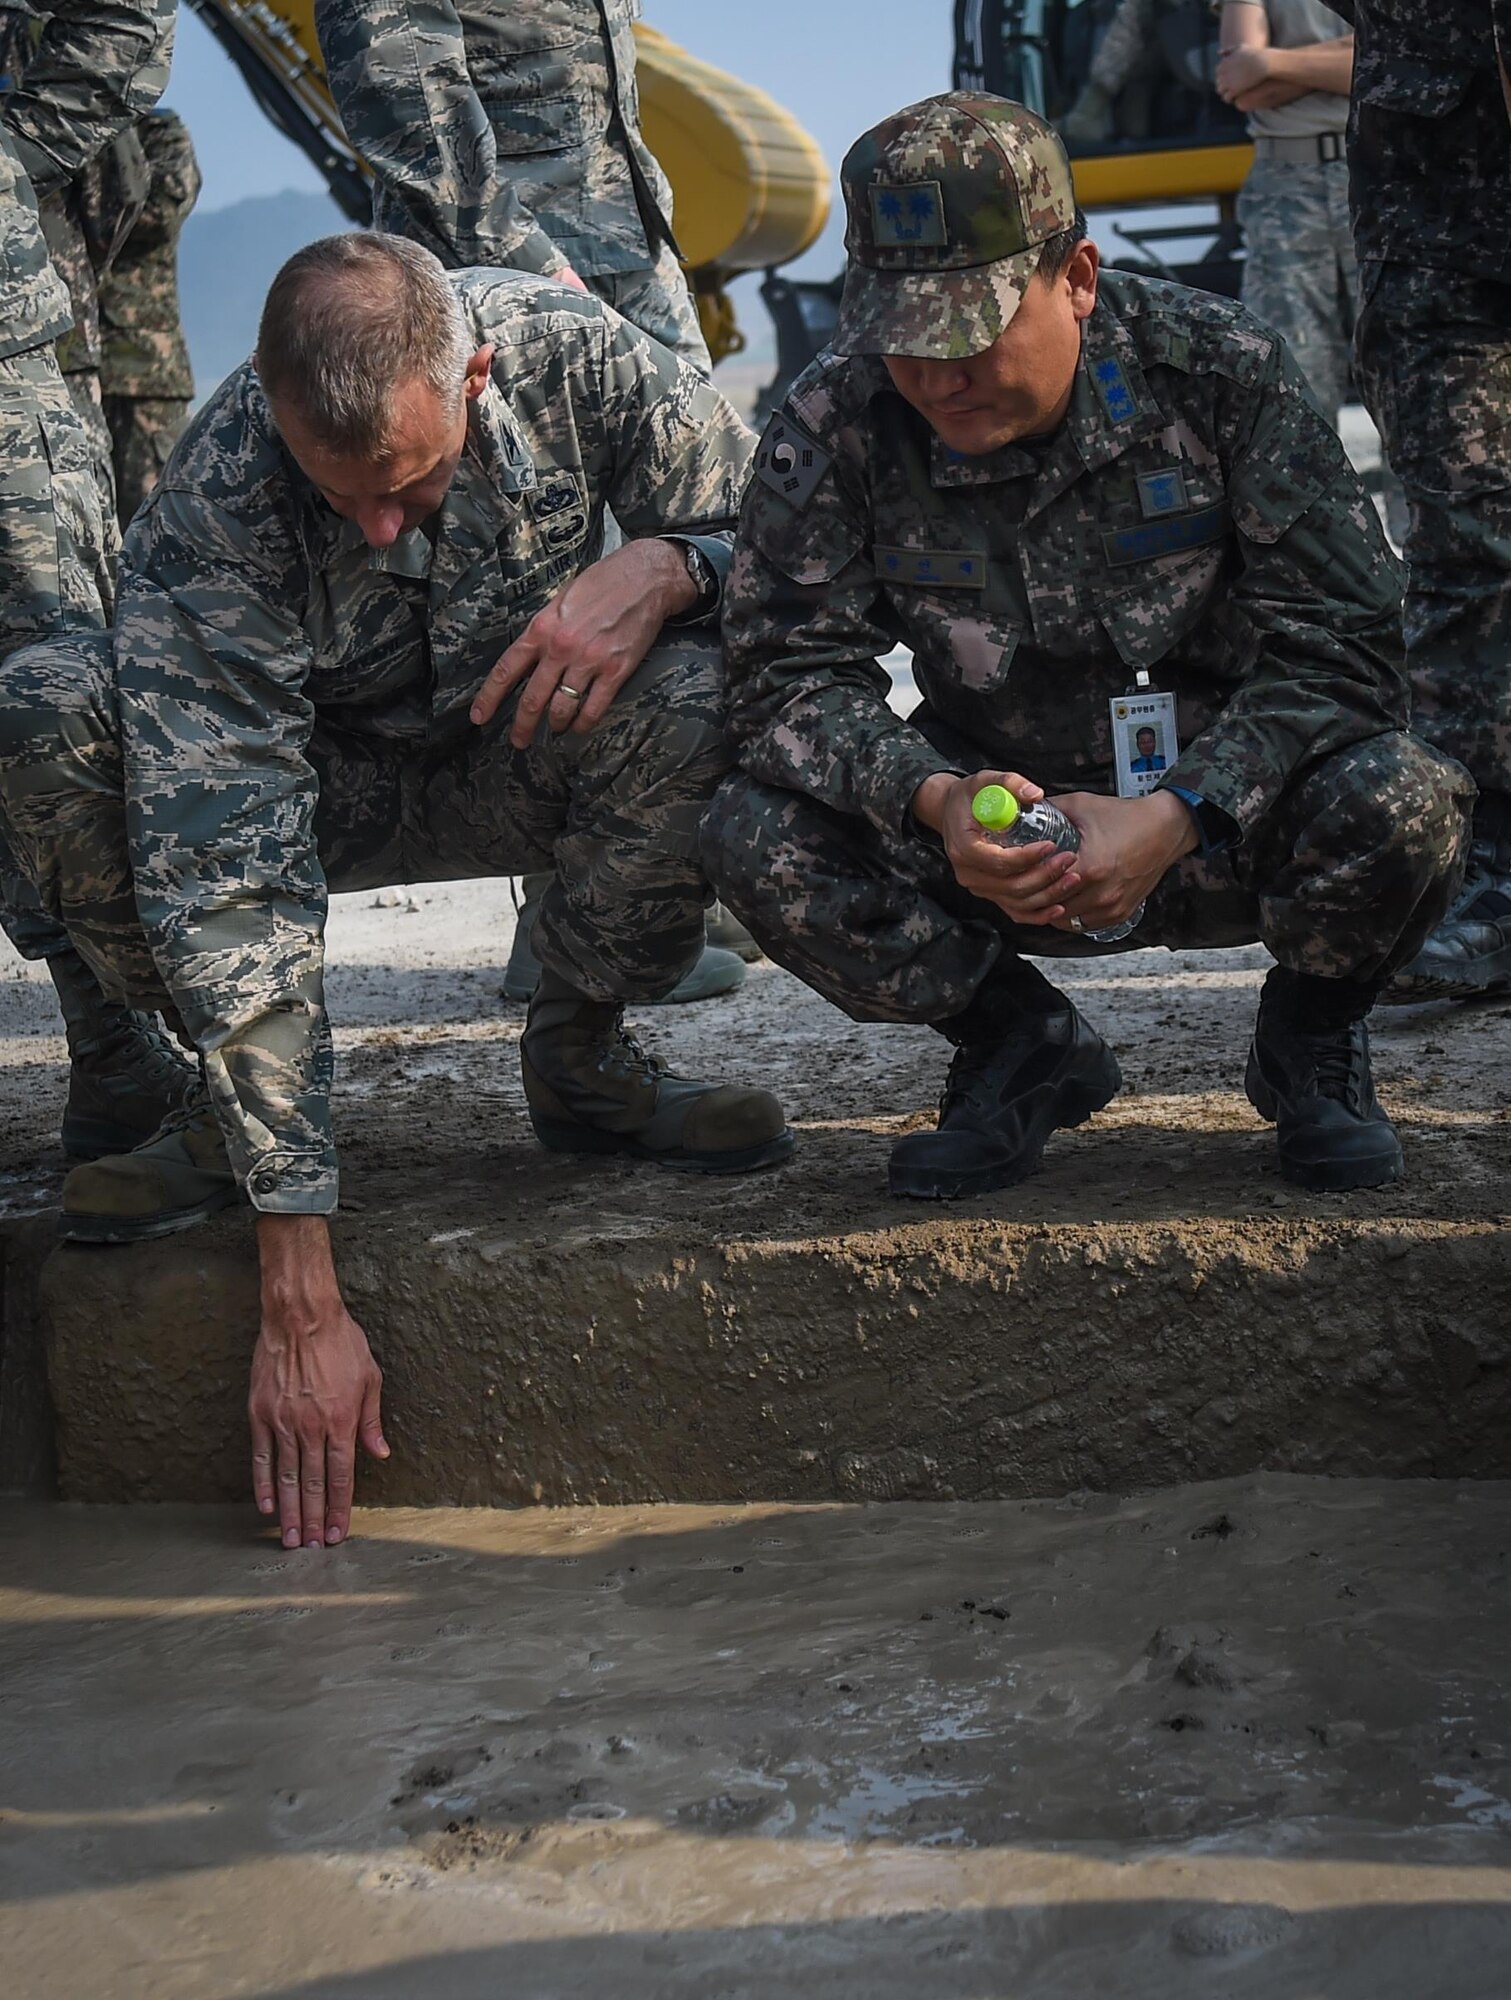 U.S. Air Force Col. Kevin Mantovani, 7th Air Force engineering division chief, and Republic of Korea Air Force Lt. Col. Injae Hwang, Air Force Operation and Command, observe a Rapid Airfield Damage Repair bilateral training exercise at Gwangju Air Base, R.O.K., Nov. 8, 2017. The training exercise was designed to enhance interoperability, prepare for wartime contingencies and build partnership capacity in the Indo-Asia Pacific region. (U.S. Air Force photo by Senior Airman Curt Beach)